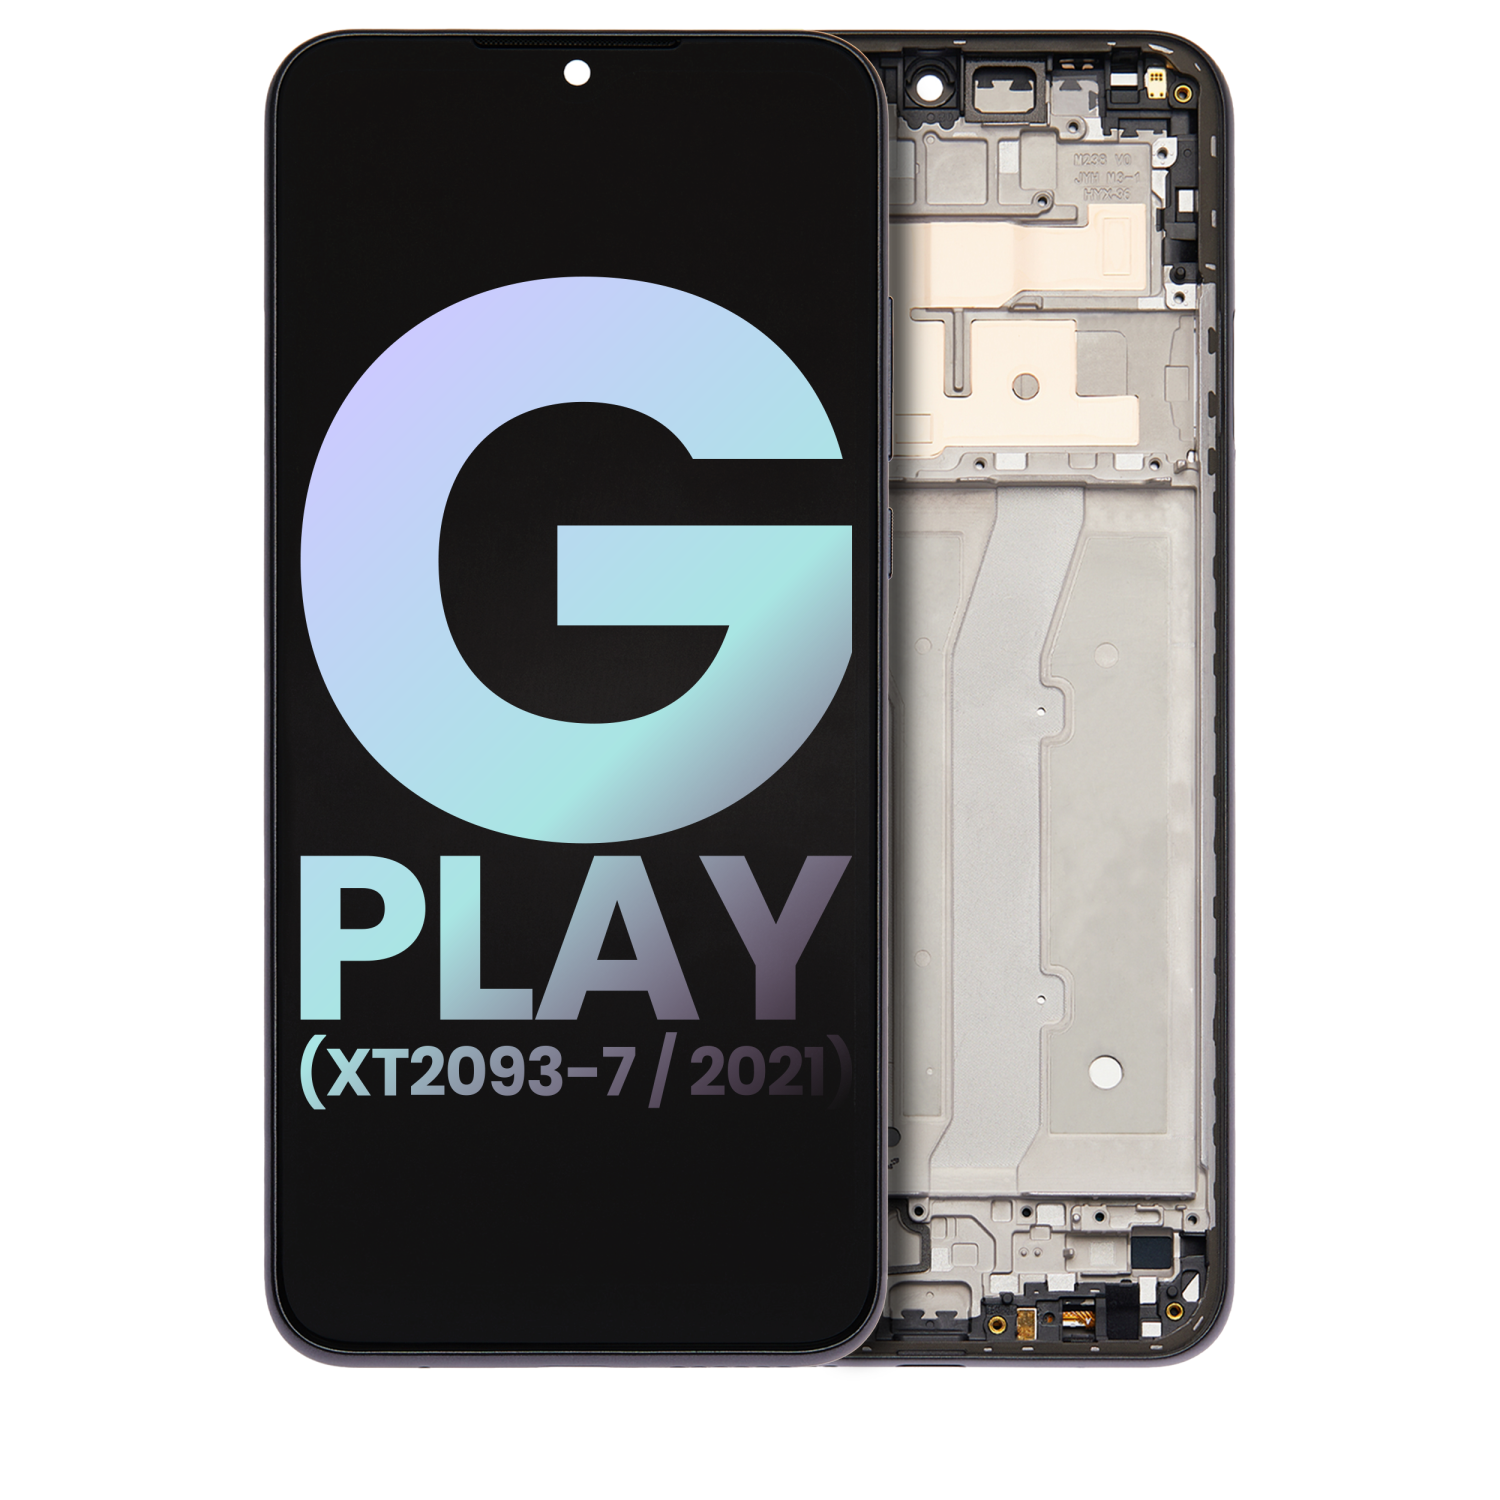 Replacement LCD Assembly With Frame Compatible With Motorola Moto G Play (XT2093-7 / 2021) (Genuine OEM) (Flash Gray)